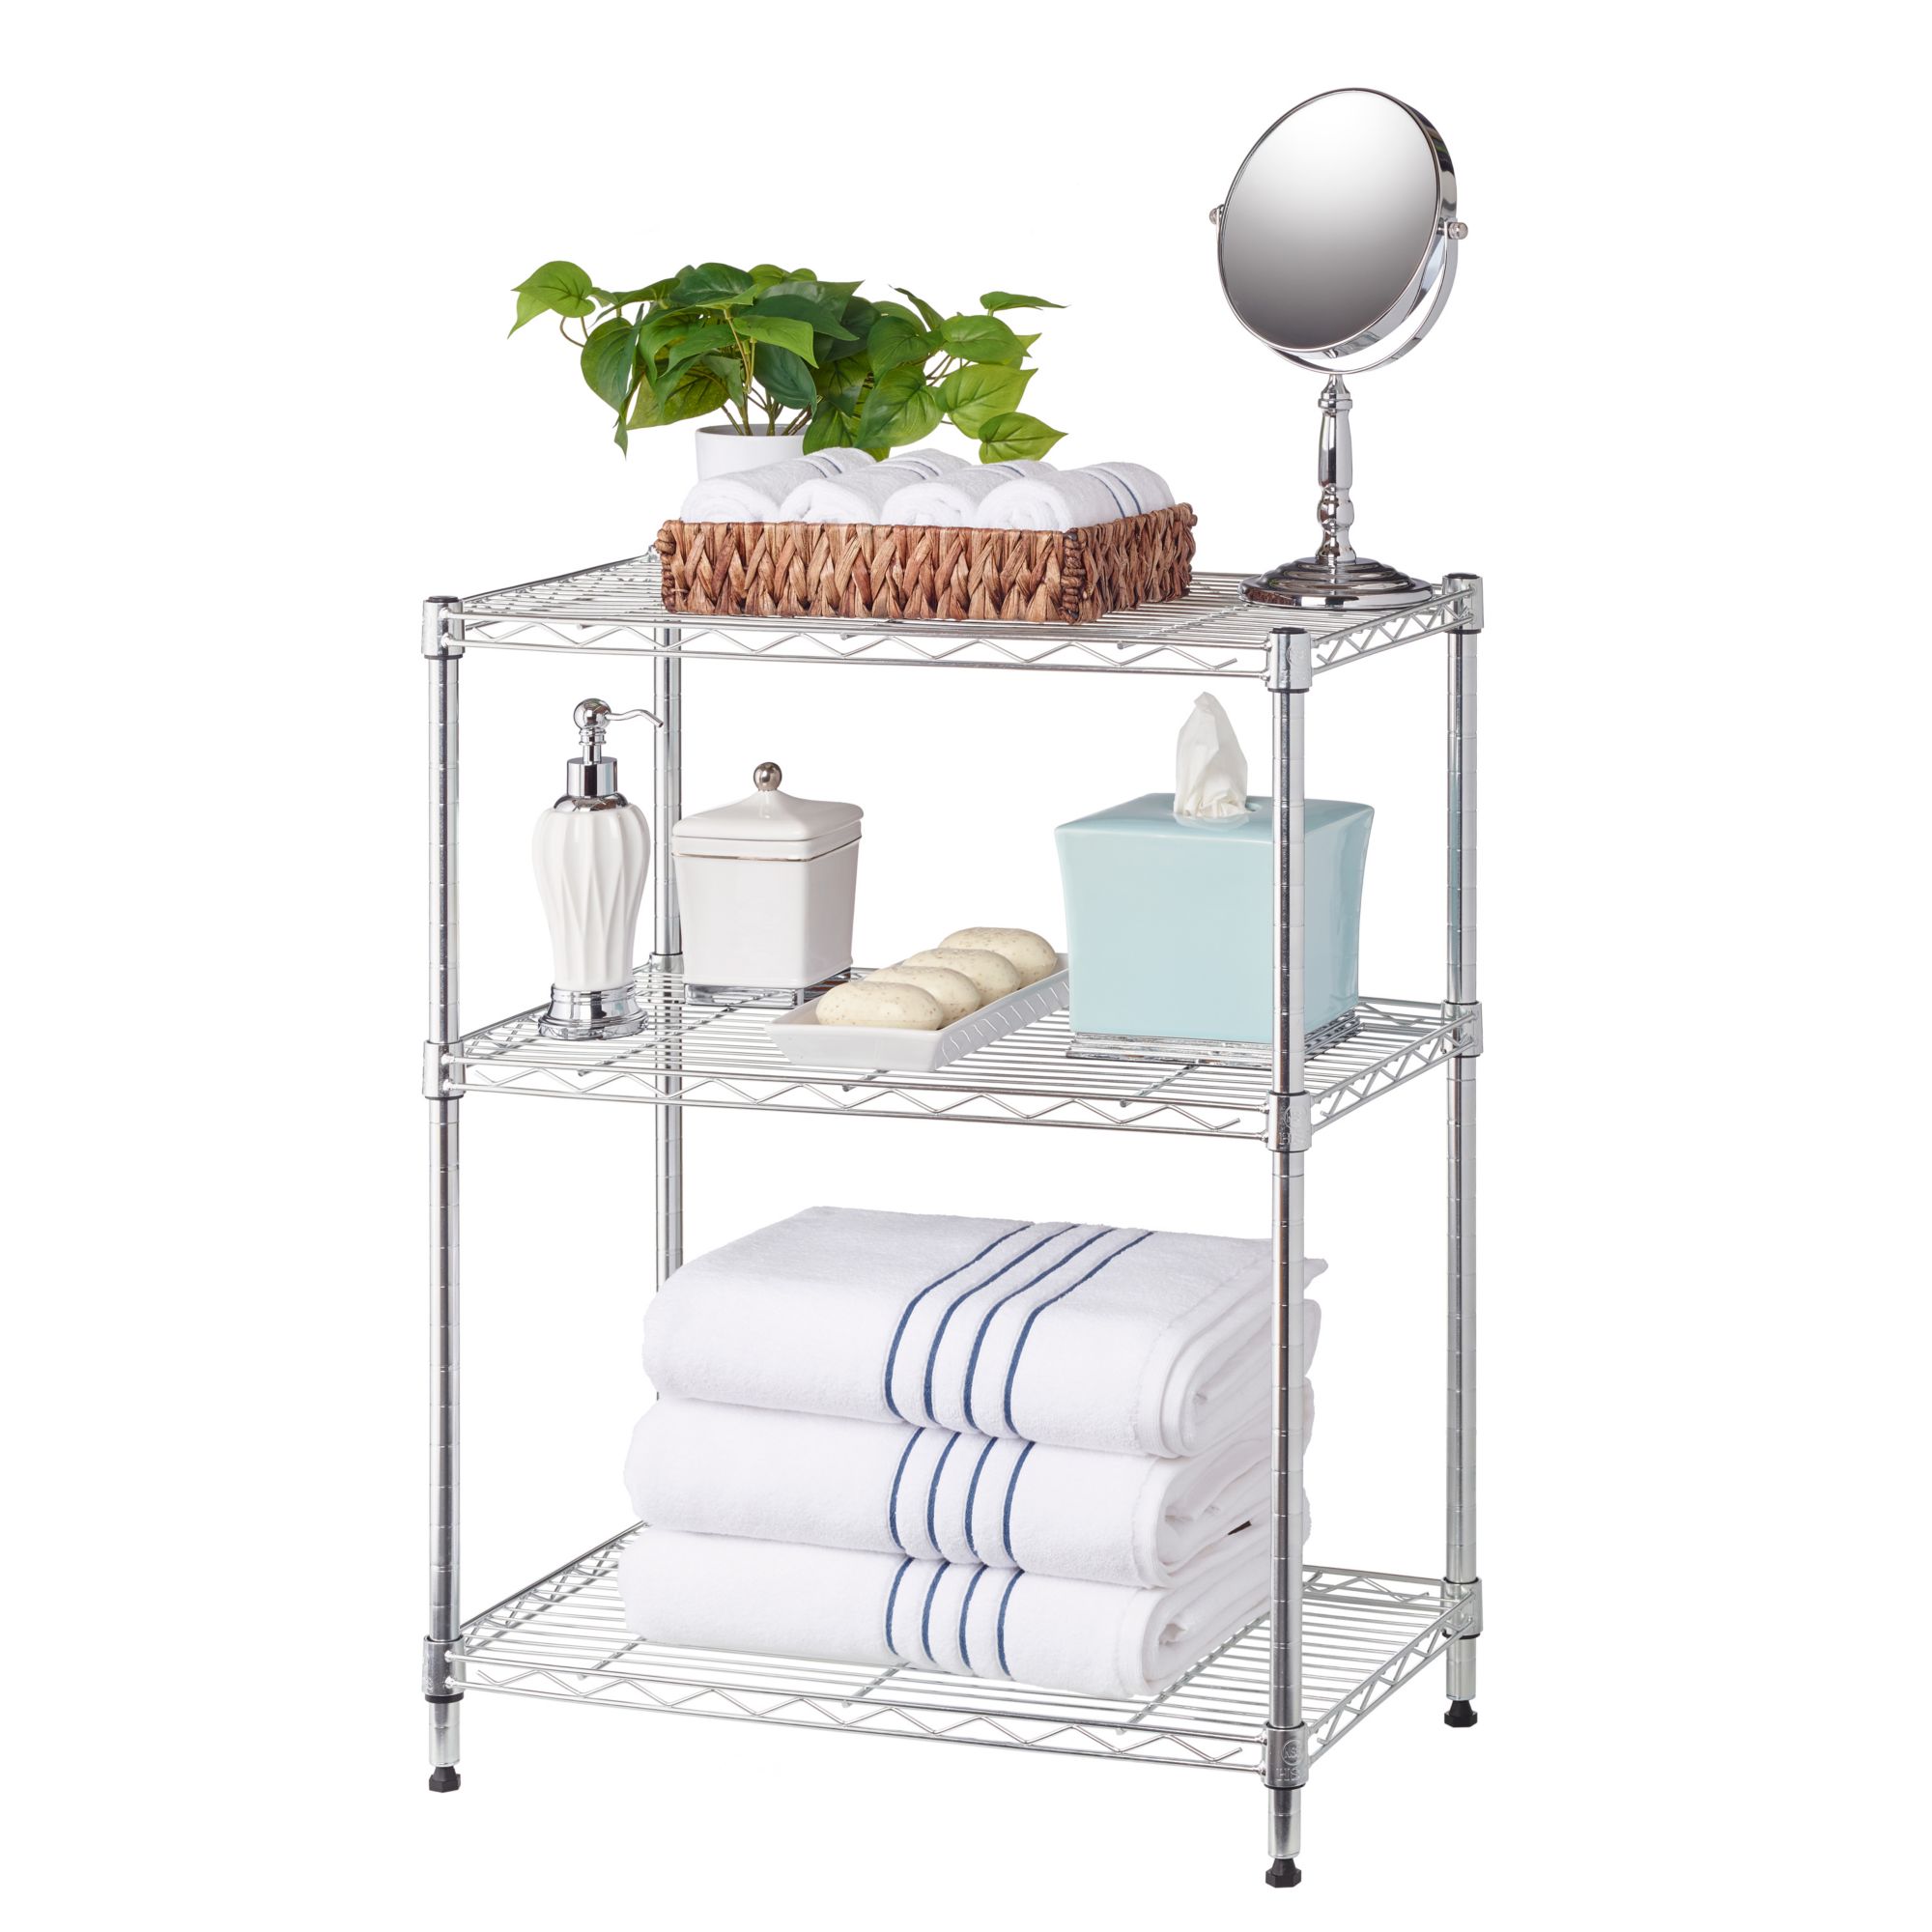 Stackable Can Rack Organizer, Practical Stylish Living